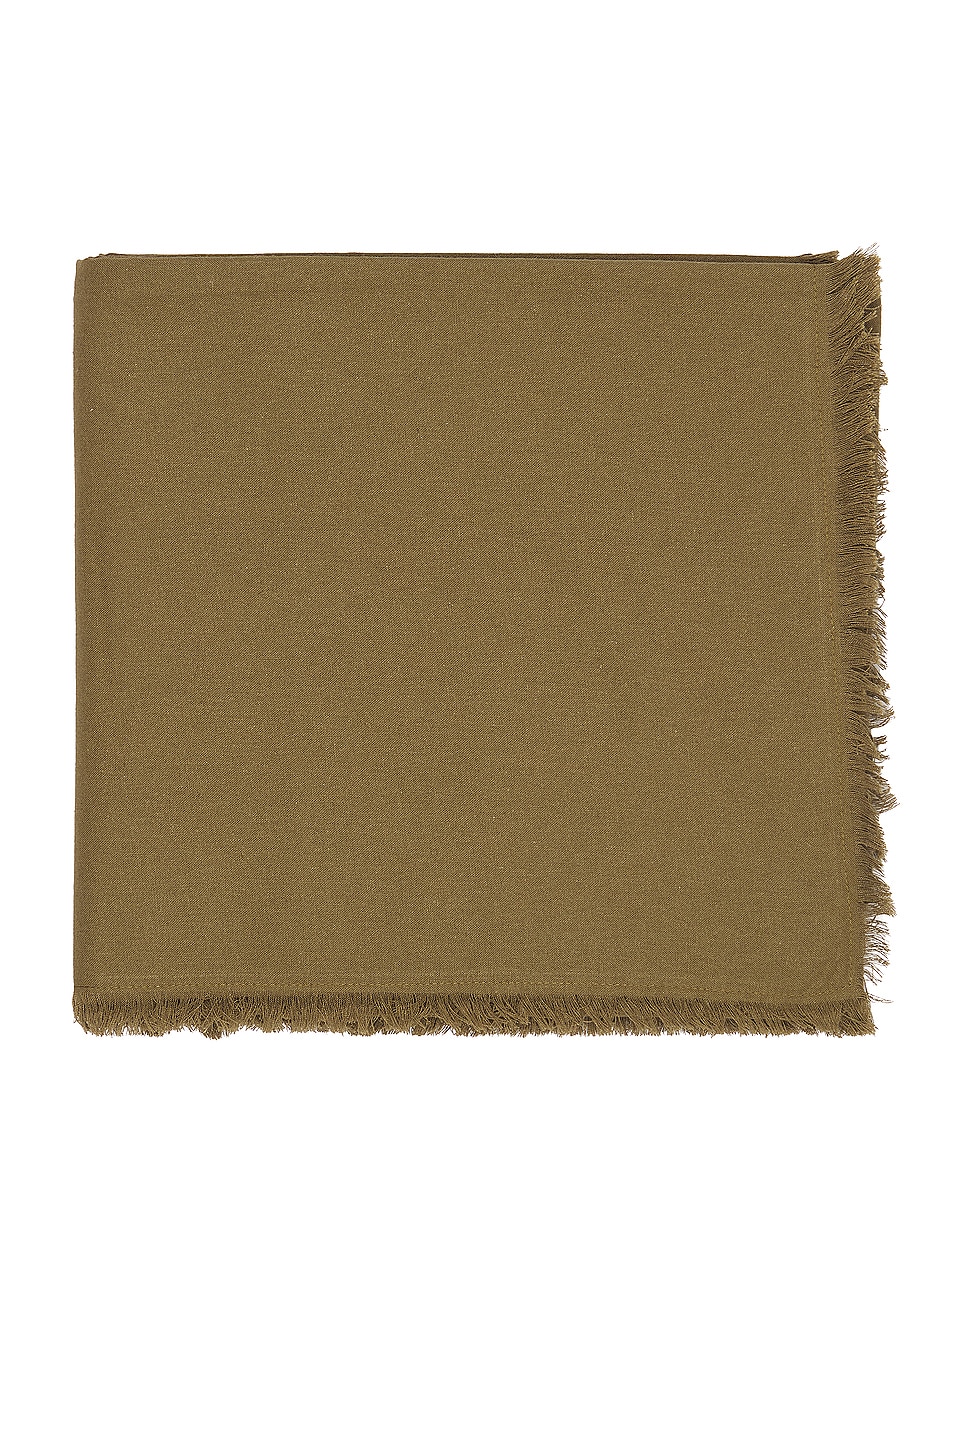 Image 1 of HAWKINS NEW YORK Essential Cotton Tablecloth in Olive